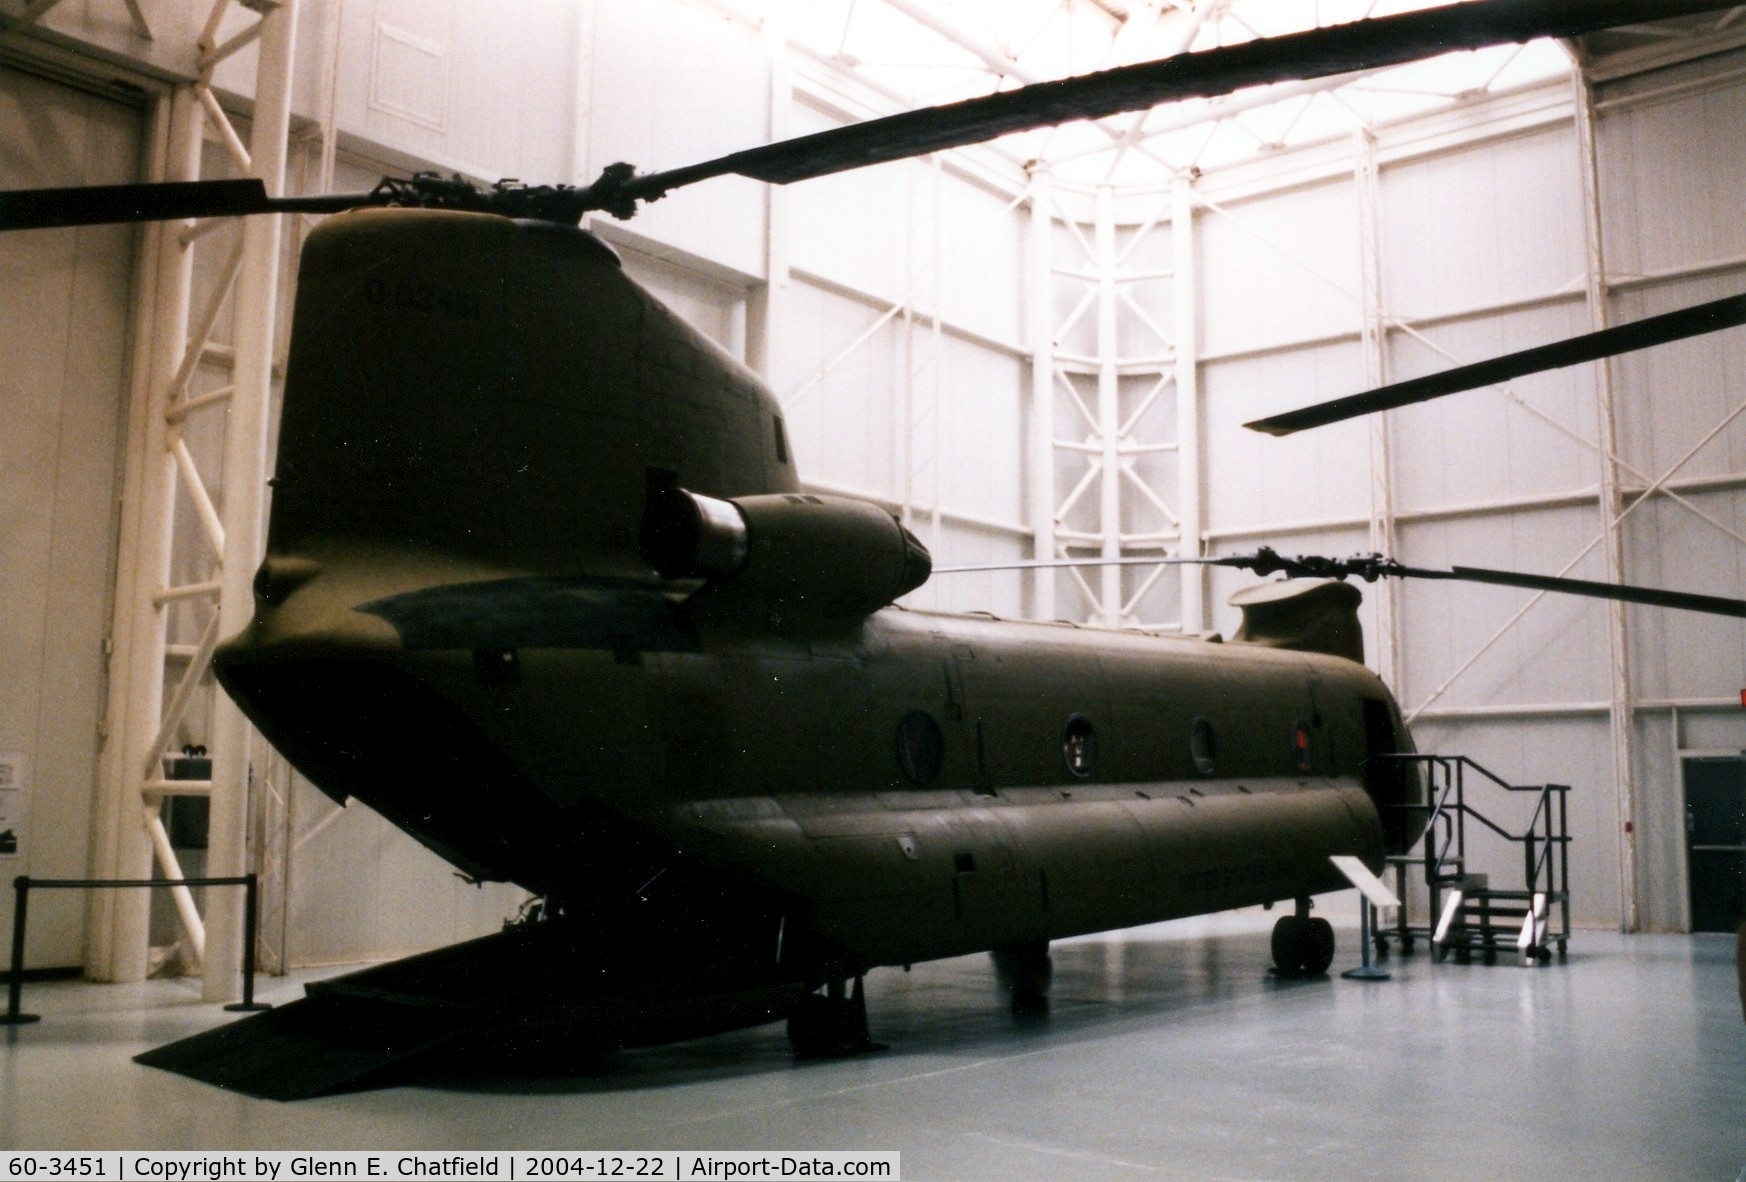 60-3451, 1961 Boeing Vertol CH-47A Chinook C/N B.010, CH-47A at the Army Aviation Museum